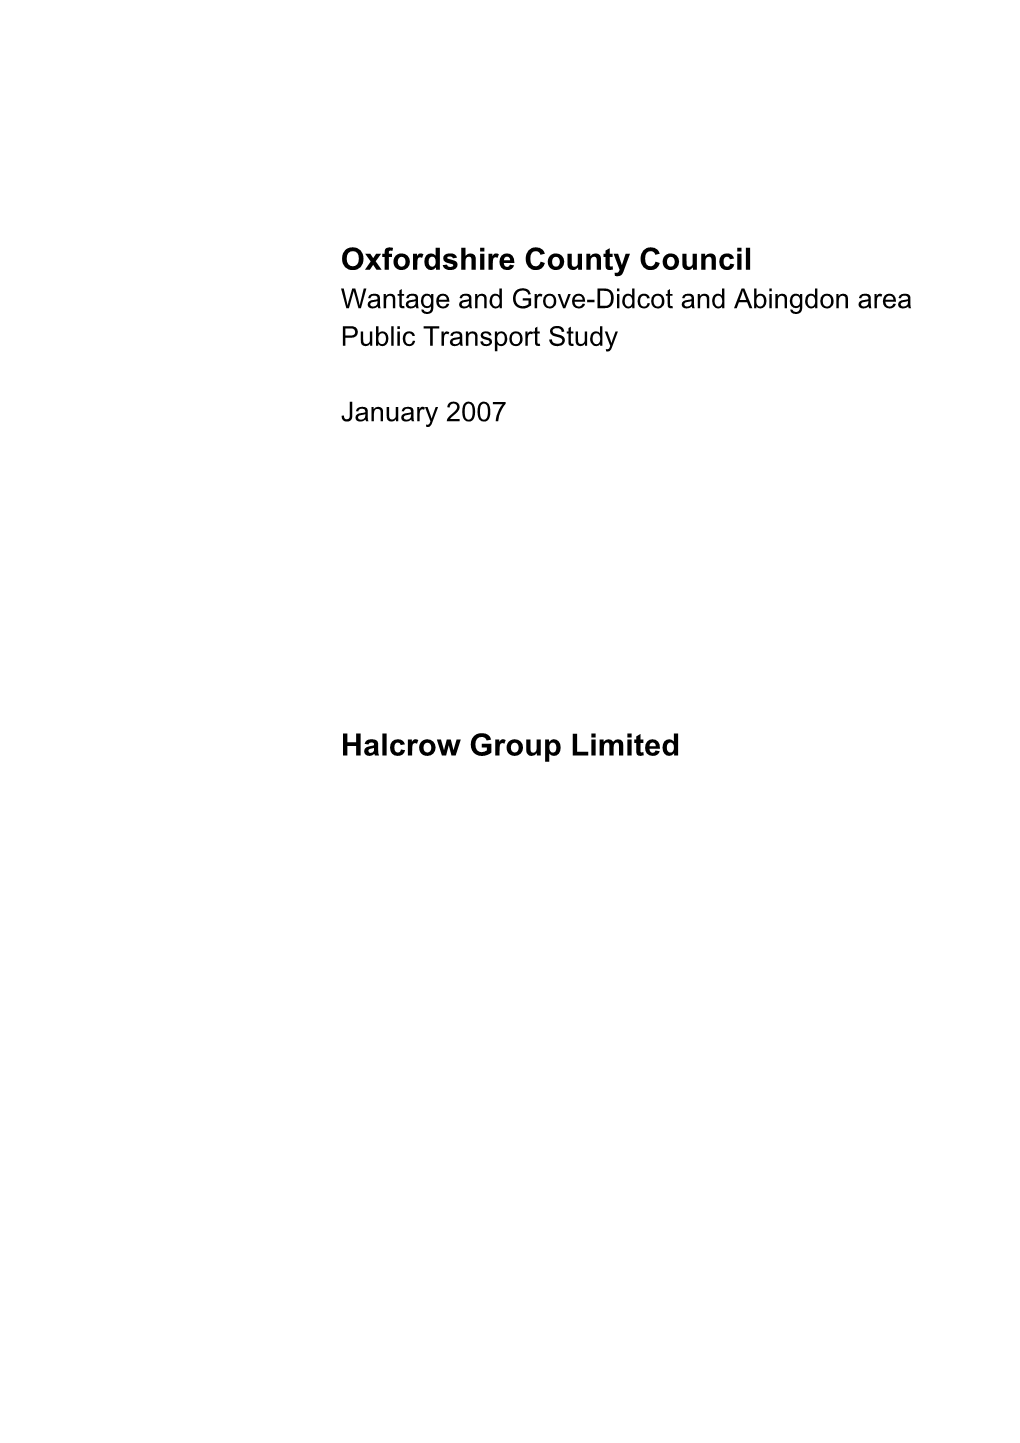 Oxfordshire County Council Halcrow Group Limited